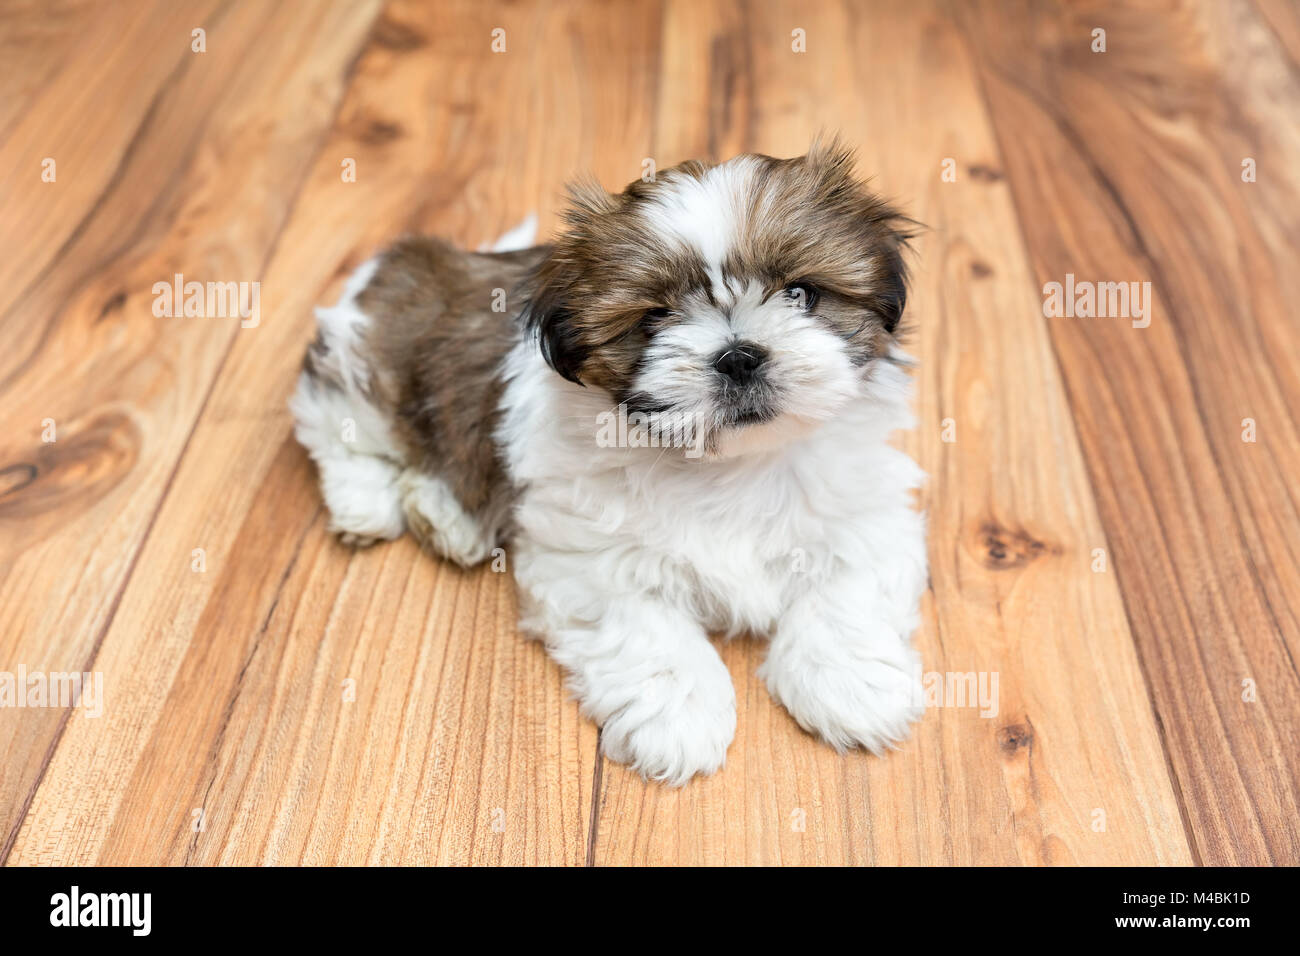 Young Chi Chu dog lying on parquet floor Stock Photo